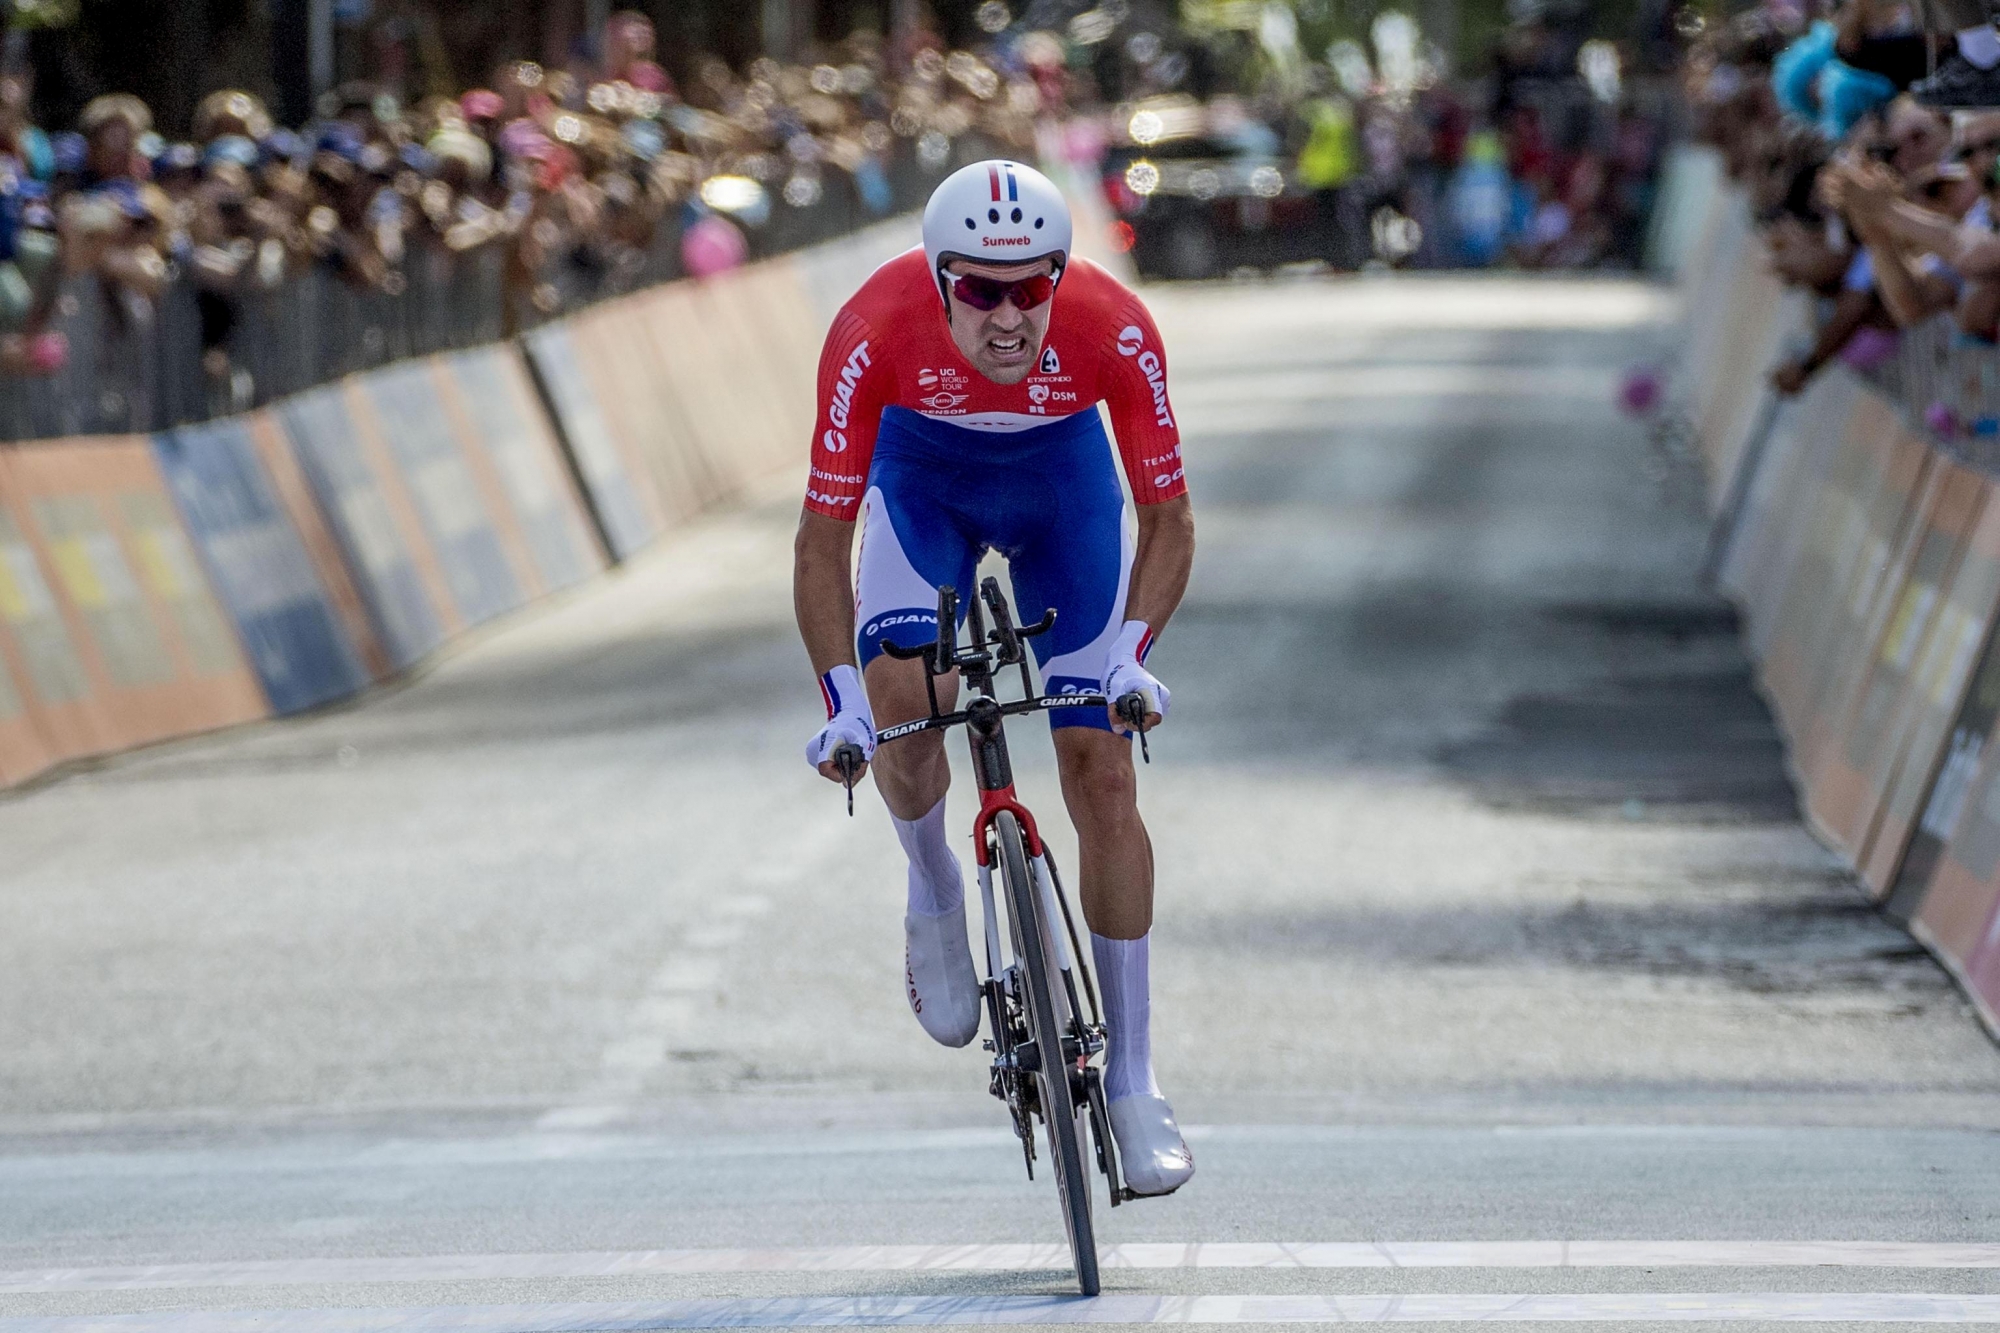 Tom Dumoulin approaches the finish line on his way to win the 10th stage of the Giro d'Italia, Tour of Italy cycling race, an individual time trial from Foligno to Montefalco, Tuesday, May 16, 2017.  Dutch rider Tom Dumoulin has dominated an individual time trial through Umbria's winemaking region to take the overall leader's pink jersey after the 10th stage of the Giro d'Italia. (Alessandro Di Meo/ANSA via AP) Italy Giro Cycling